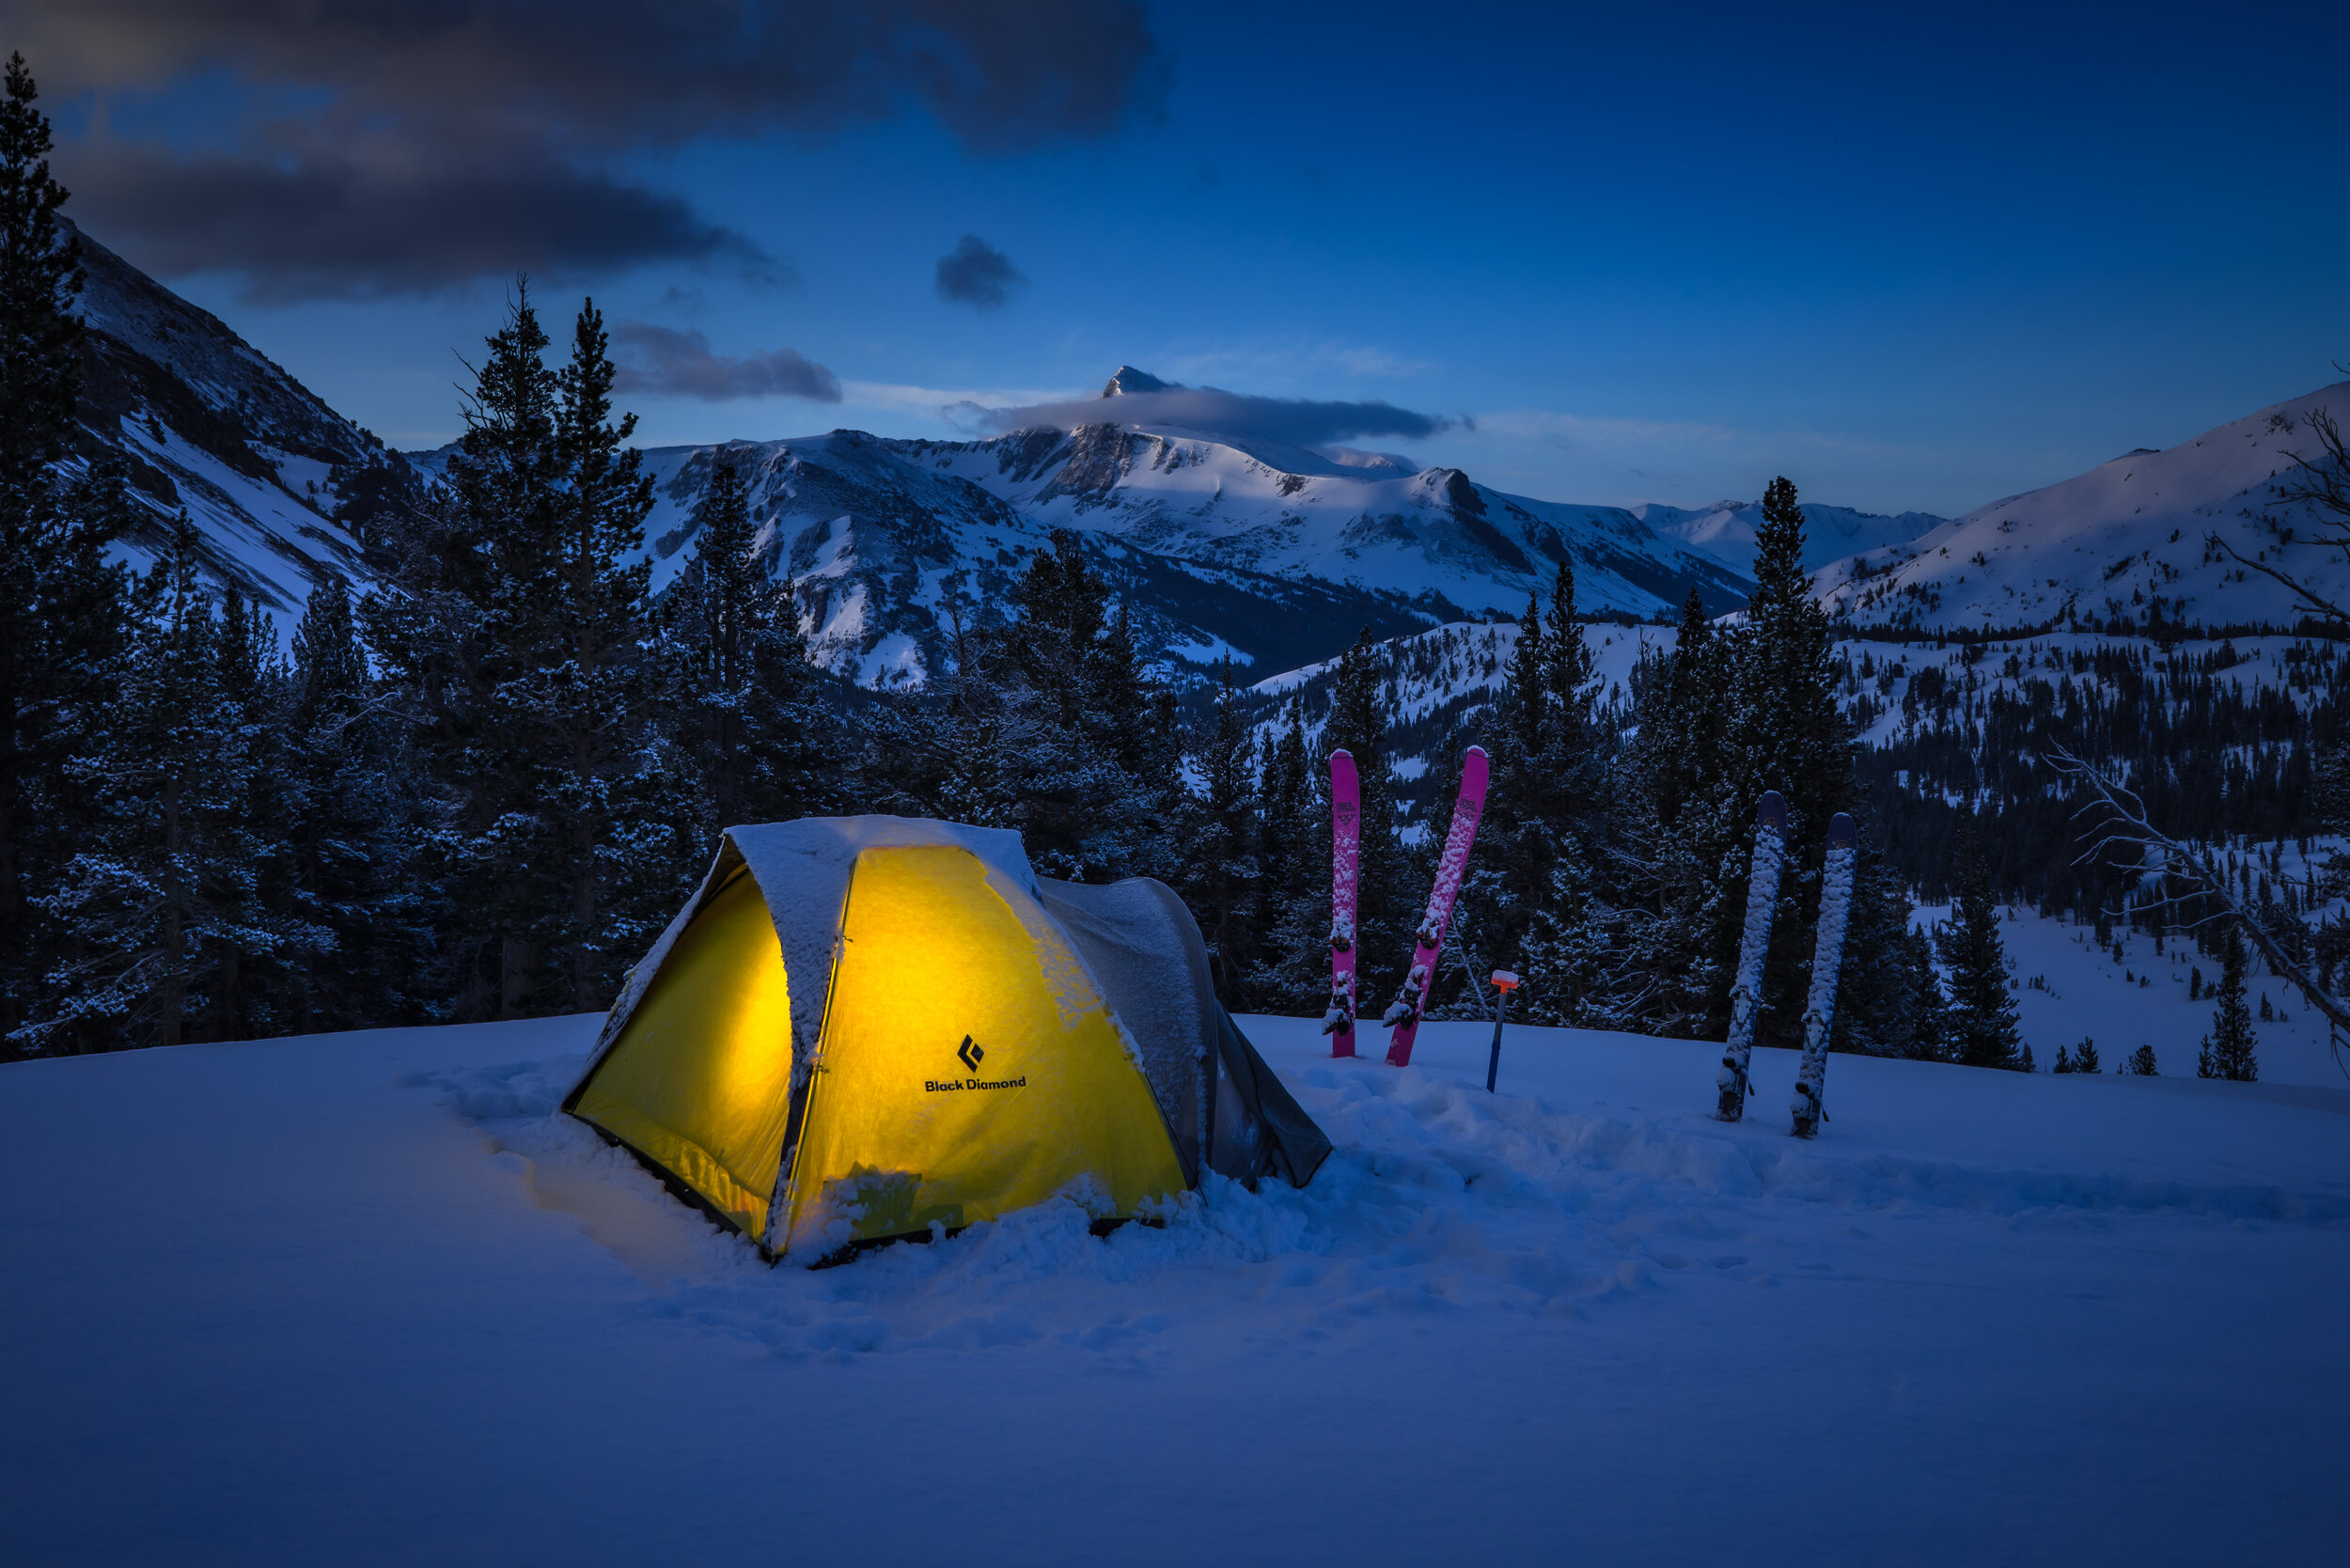  Our camp (10,400 ft) at sunrise after a long and snowy night. Mt Dana stands tall in the background. 